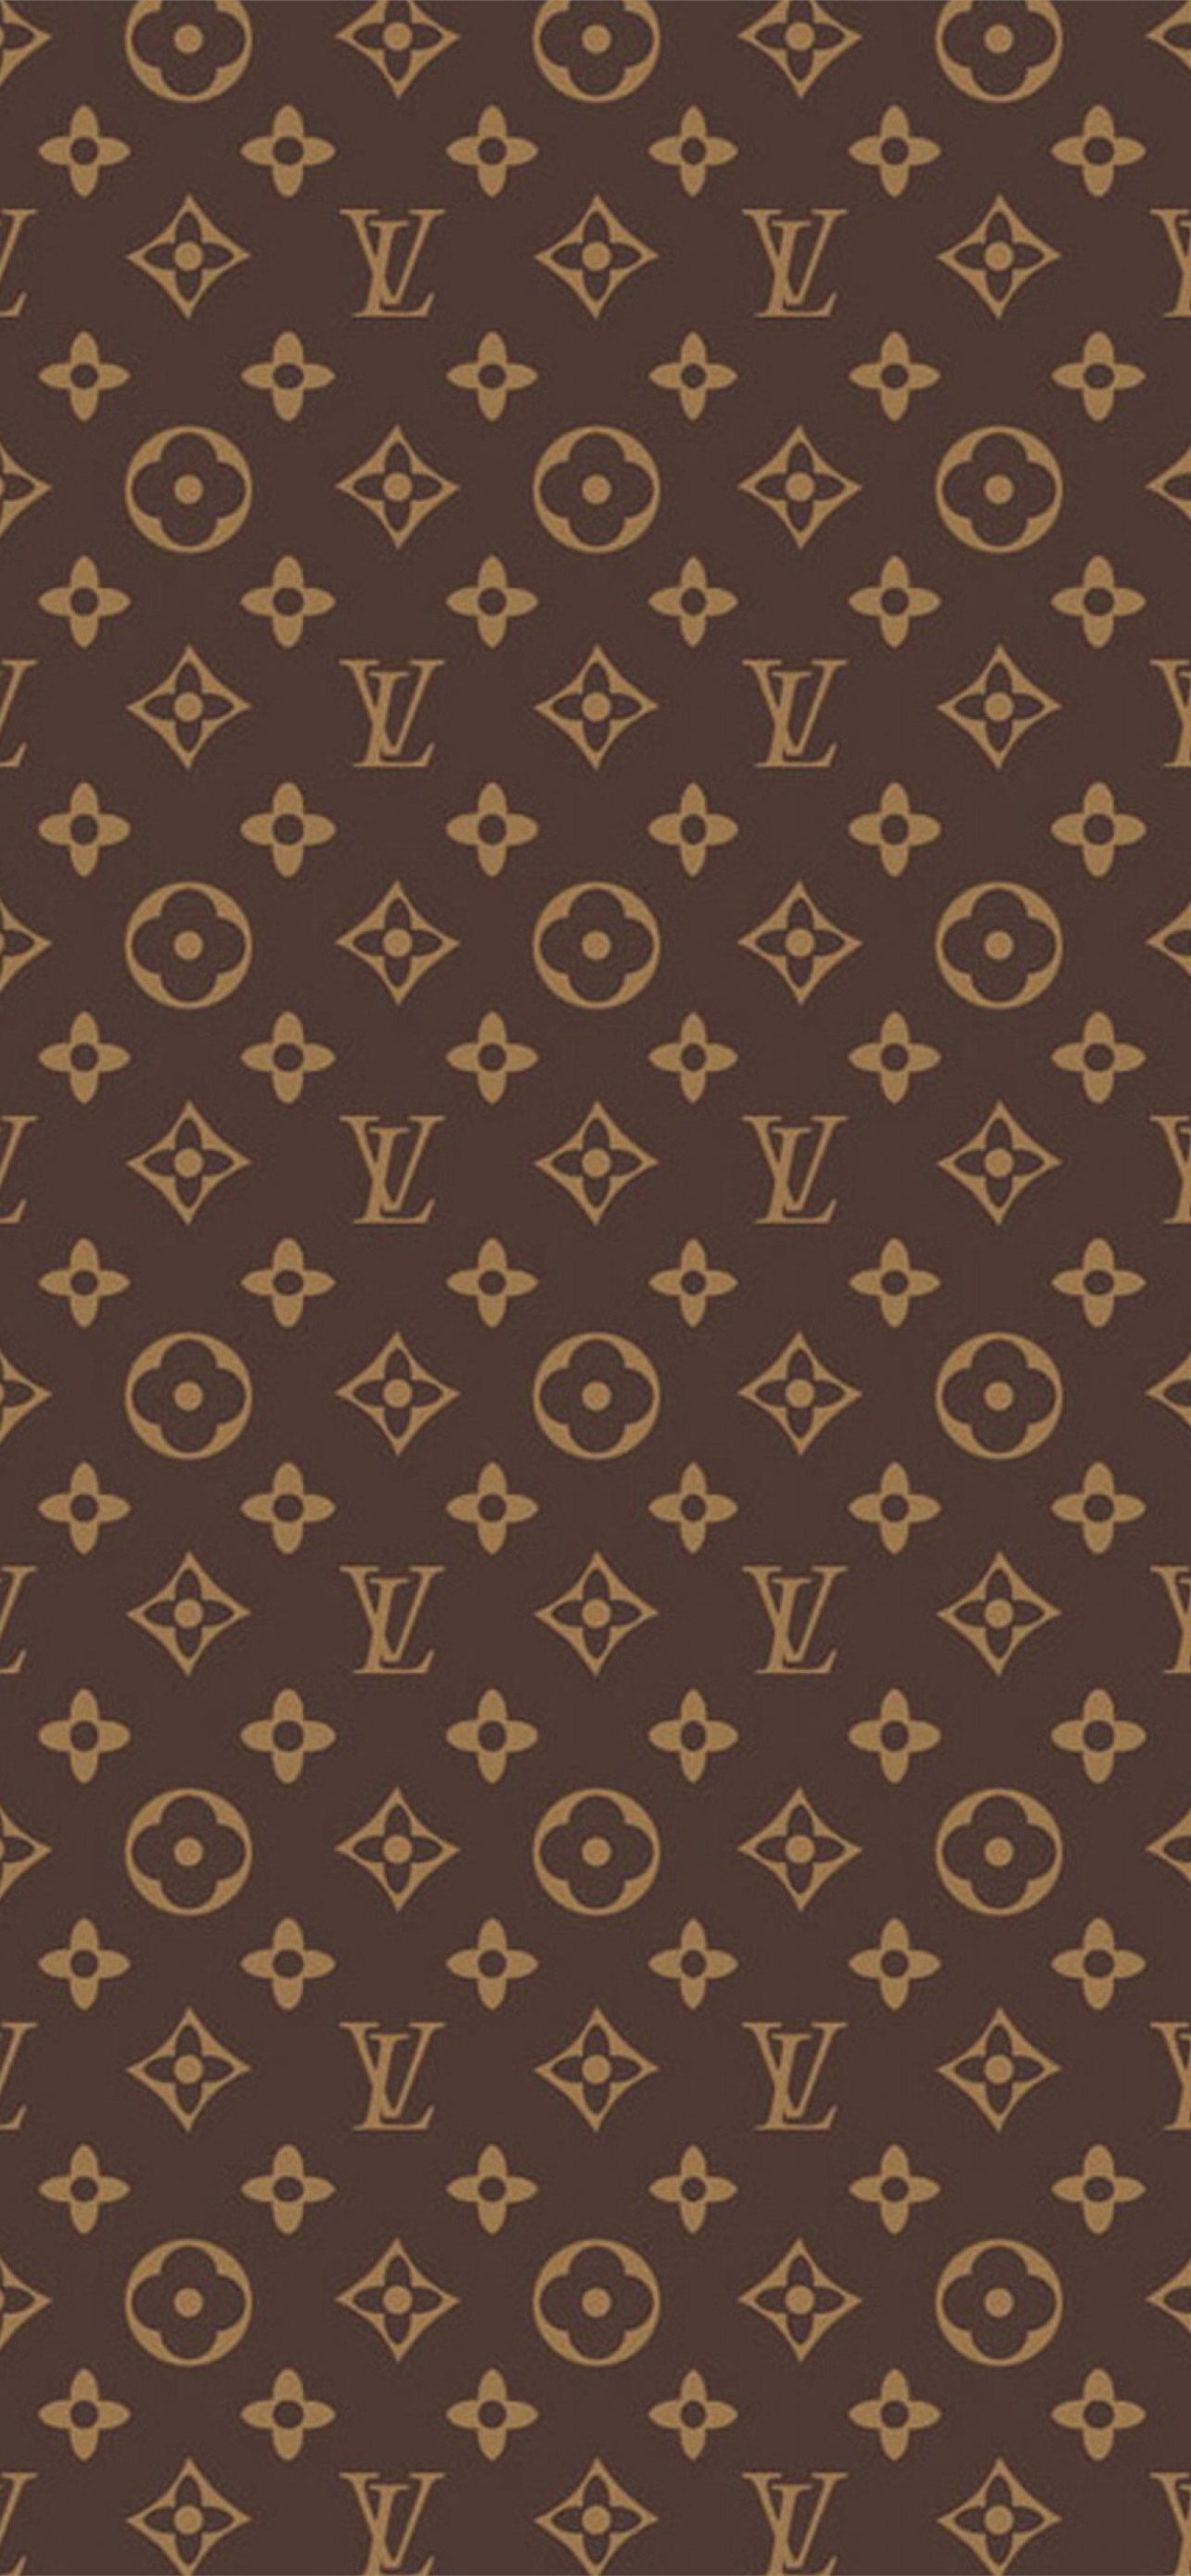 Coco Chanel Posted By Sarah Mercado Iphone Wallpapers Free Download